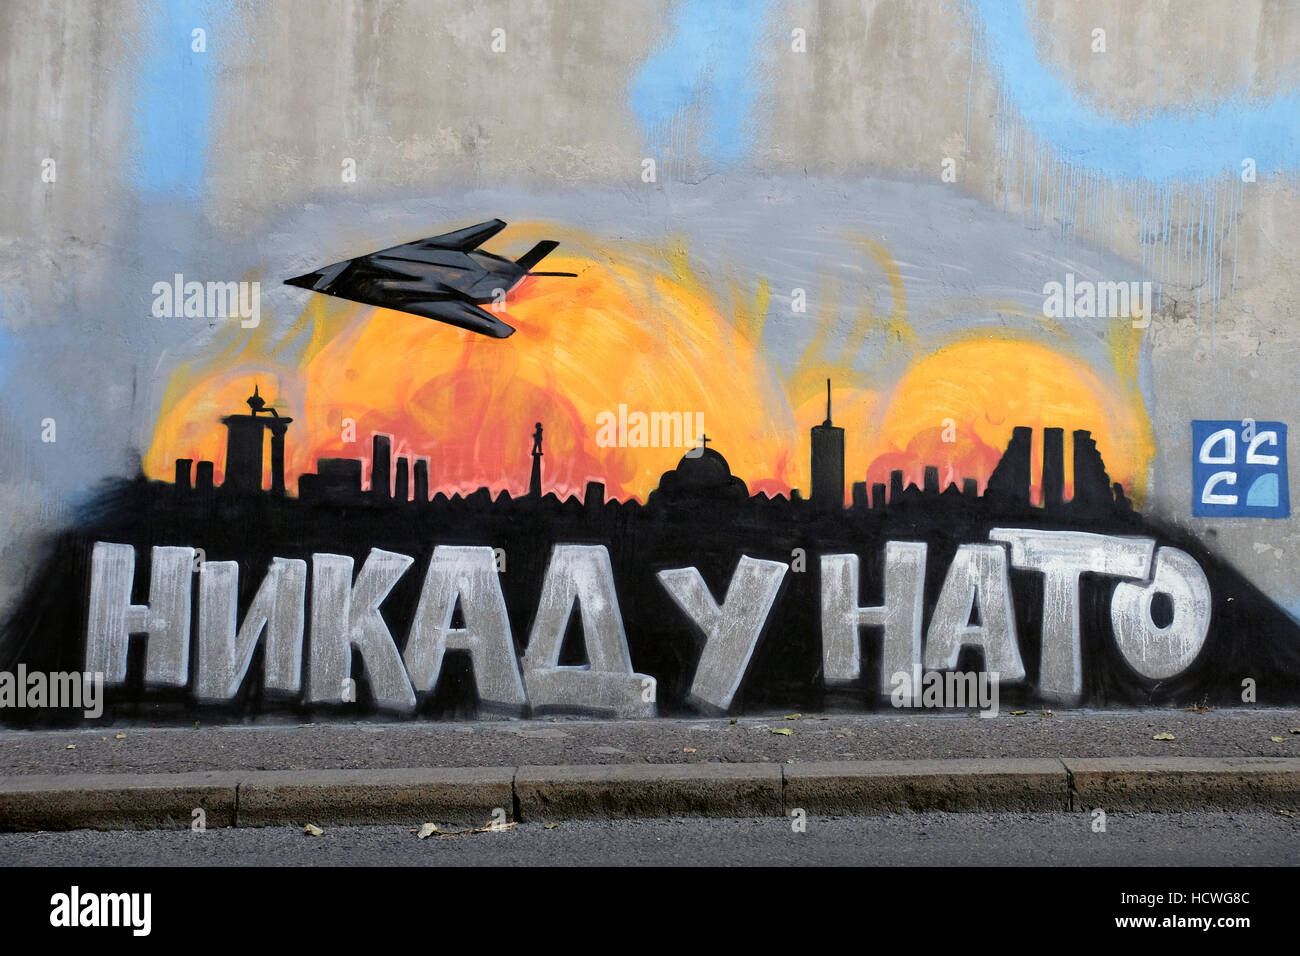 A graffiti depicting an American F-117 Stealth Fighter Jet flying over Belgrade during the Kosovo War in1999 in the city of Belgrade capital of the Republic of Serbia. The F-117 was shot down during a mission against the Army of Yugoslavia on 27 March 1999, during Operation Allied Force. Stock Photo